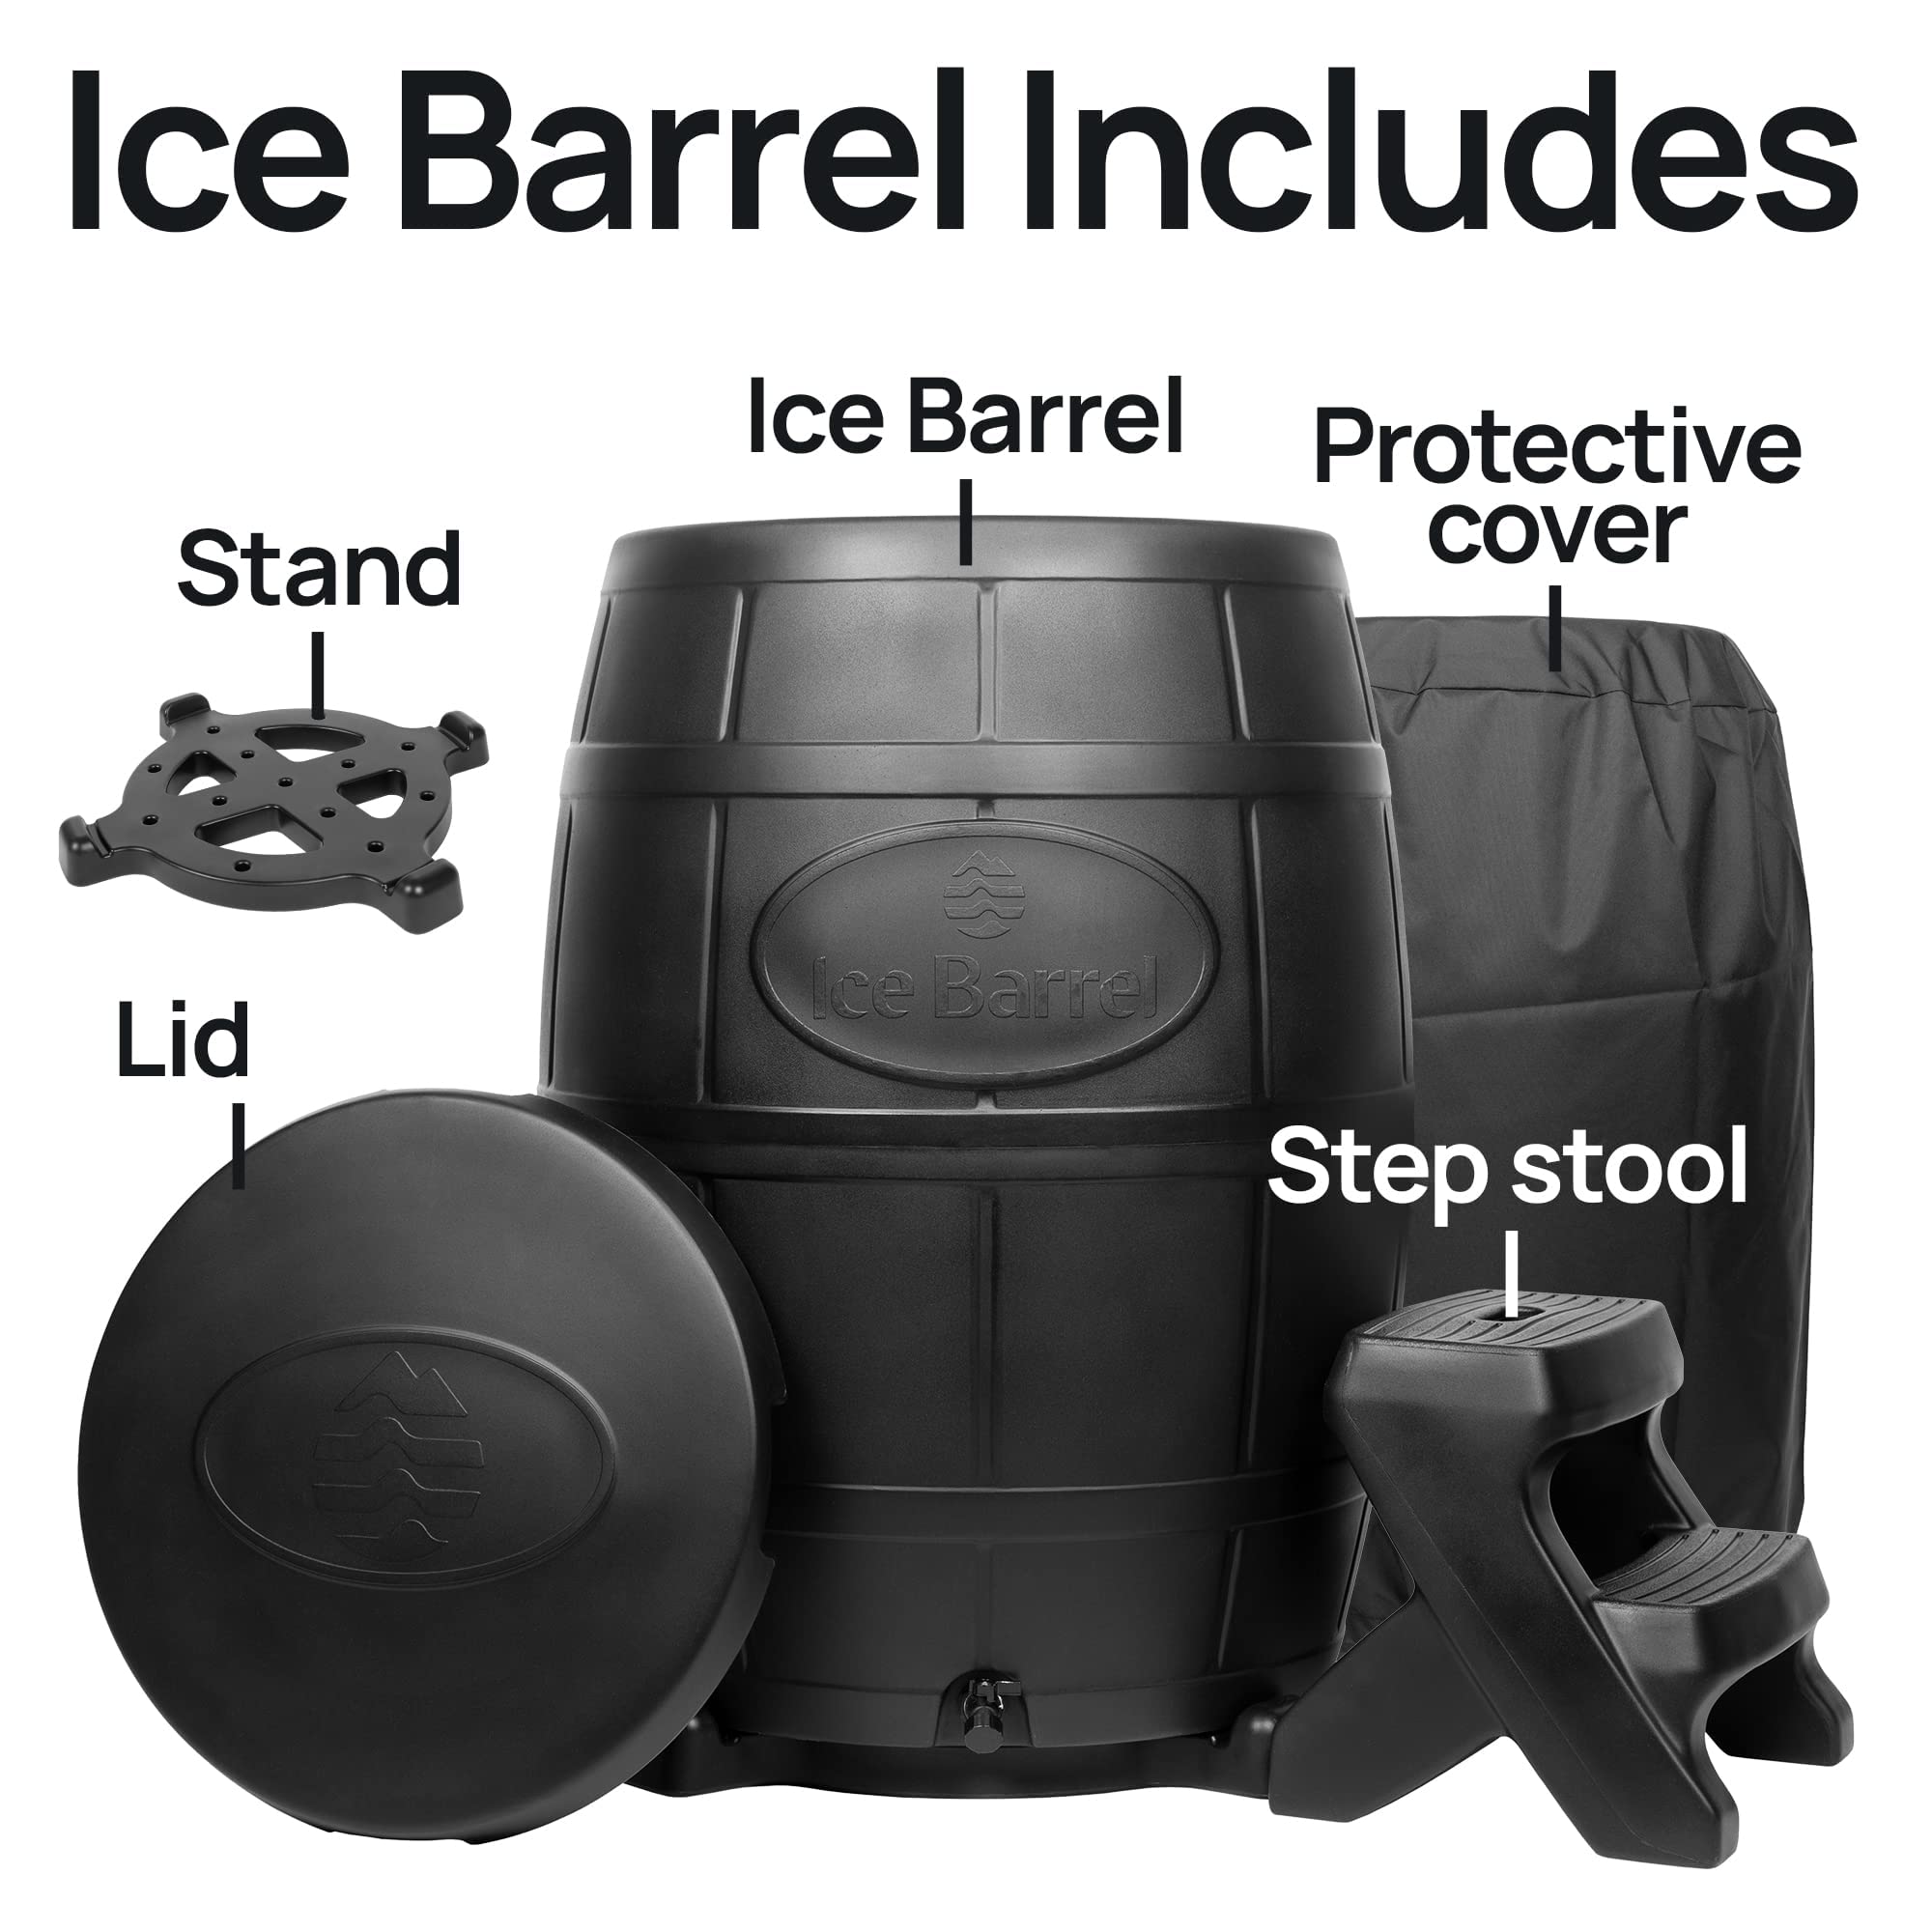 Ice Barrel Bathtub - Freestanding Cold Therapy Training Tub for Athletes - Adult Spa for Ice Baths and Soaking (Charcoal Black)